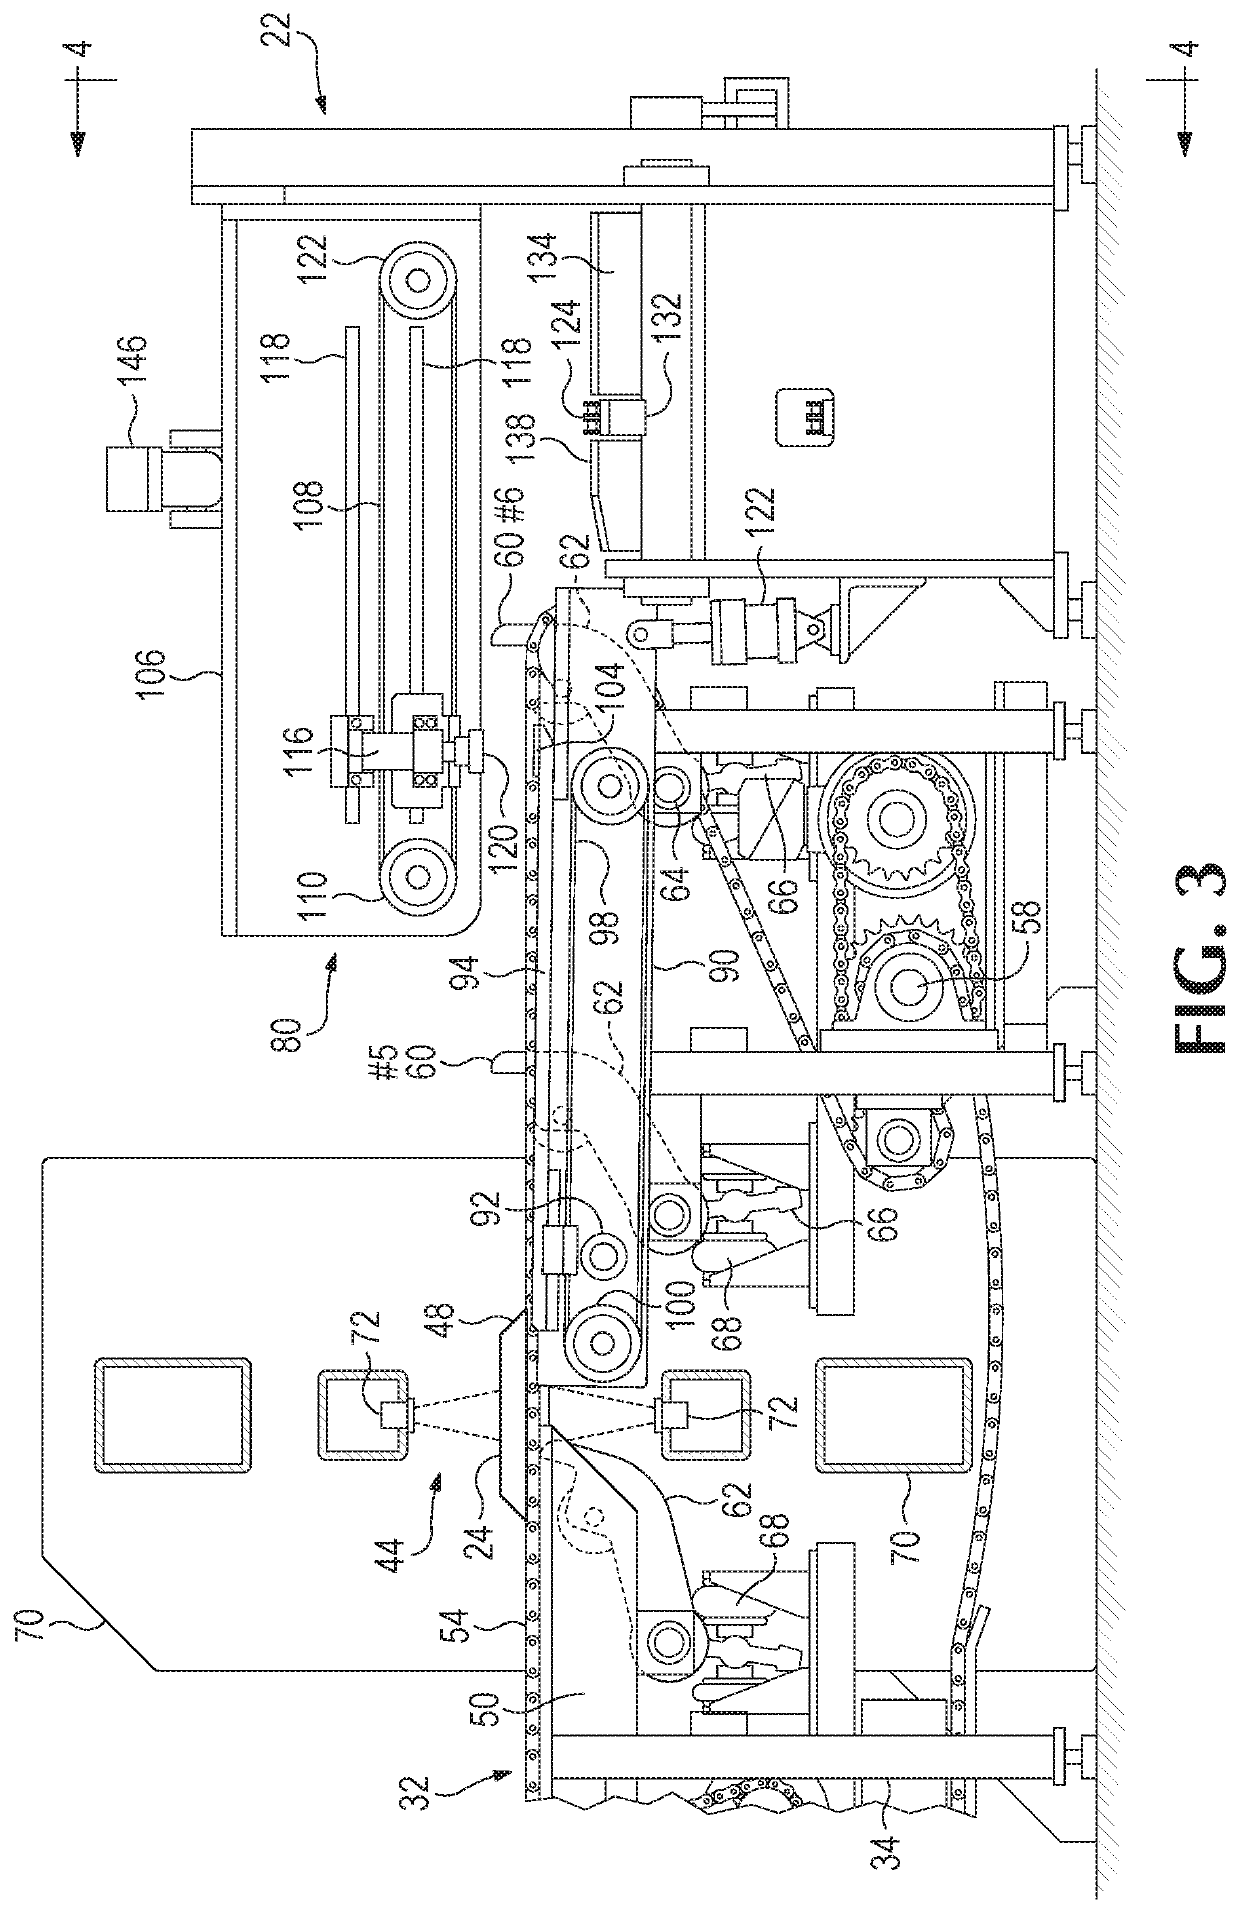 Method and apparatus for providing flitches to an edger